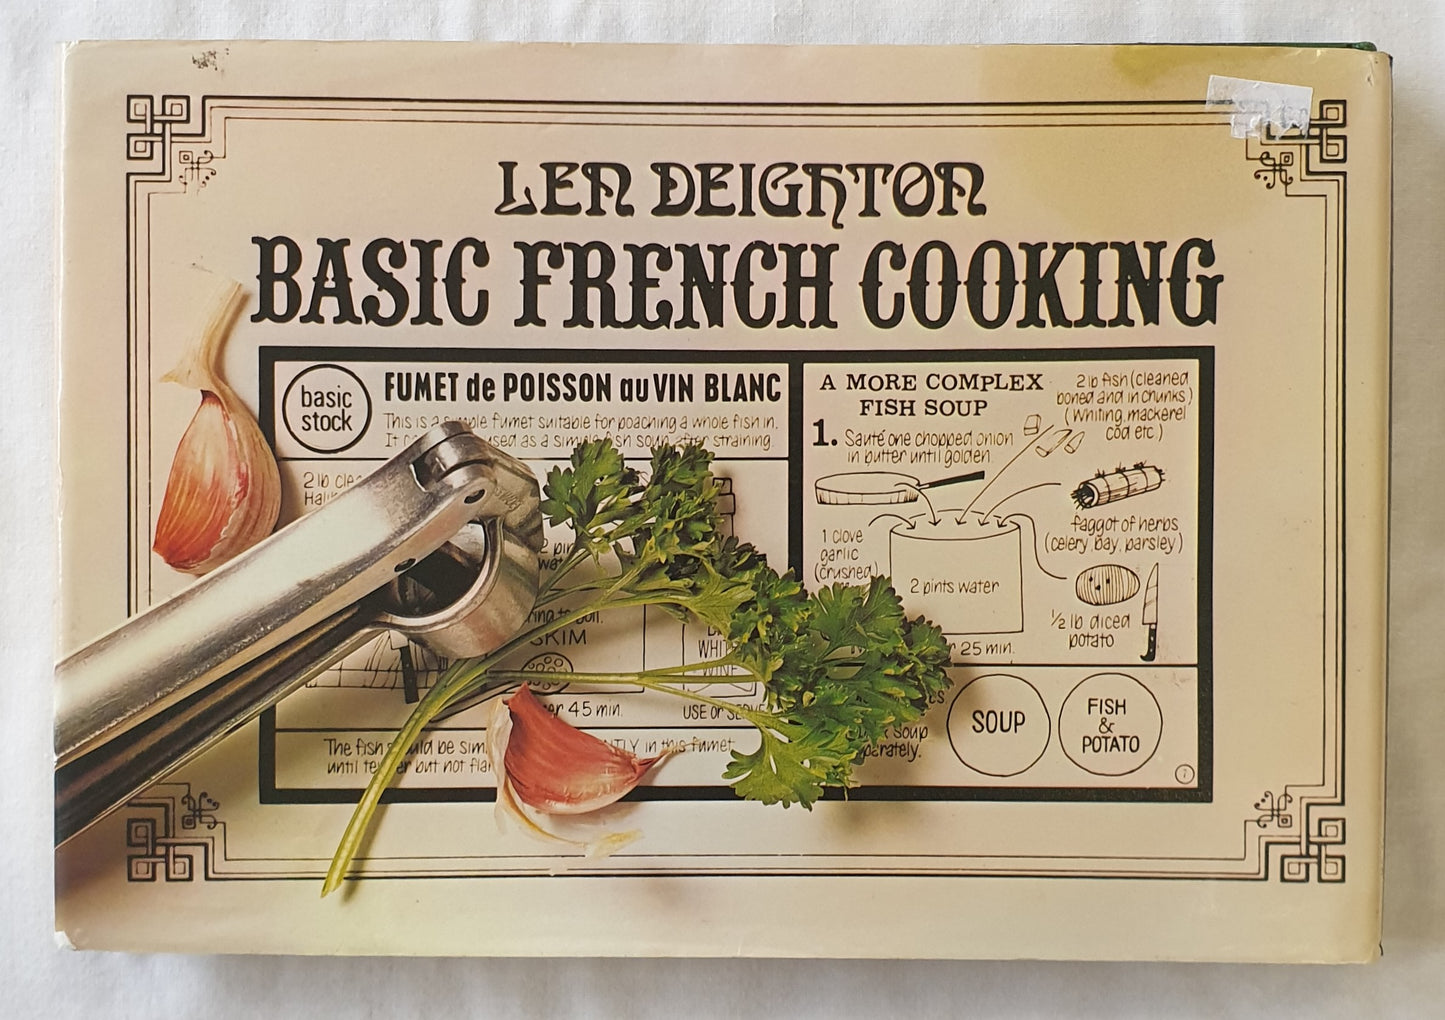 Basic French Cooking by Len Deighton